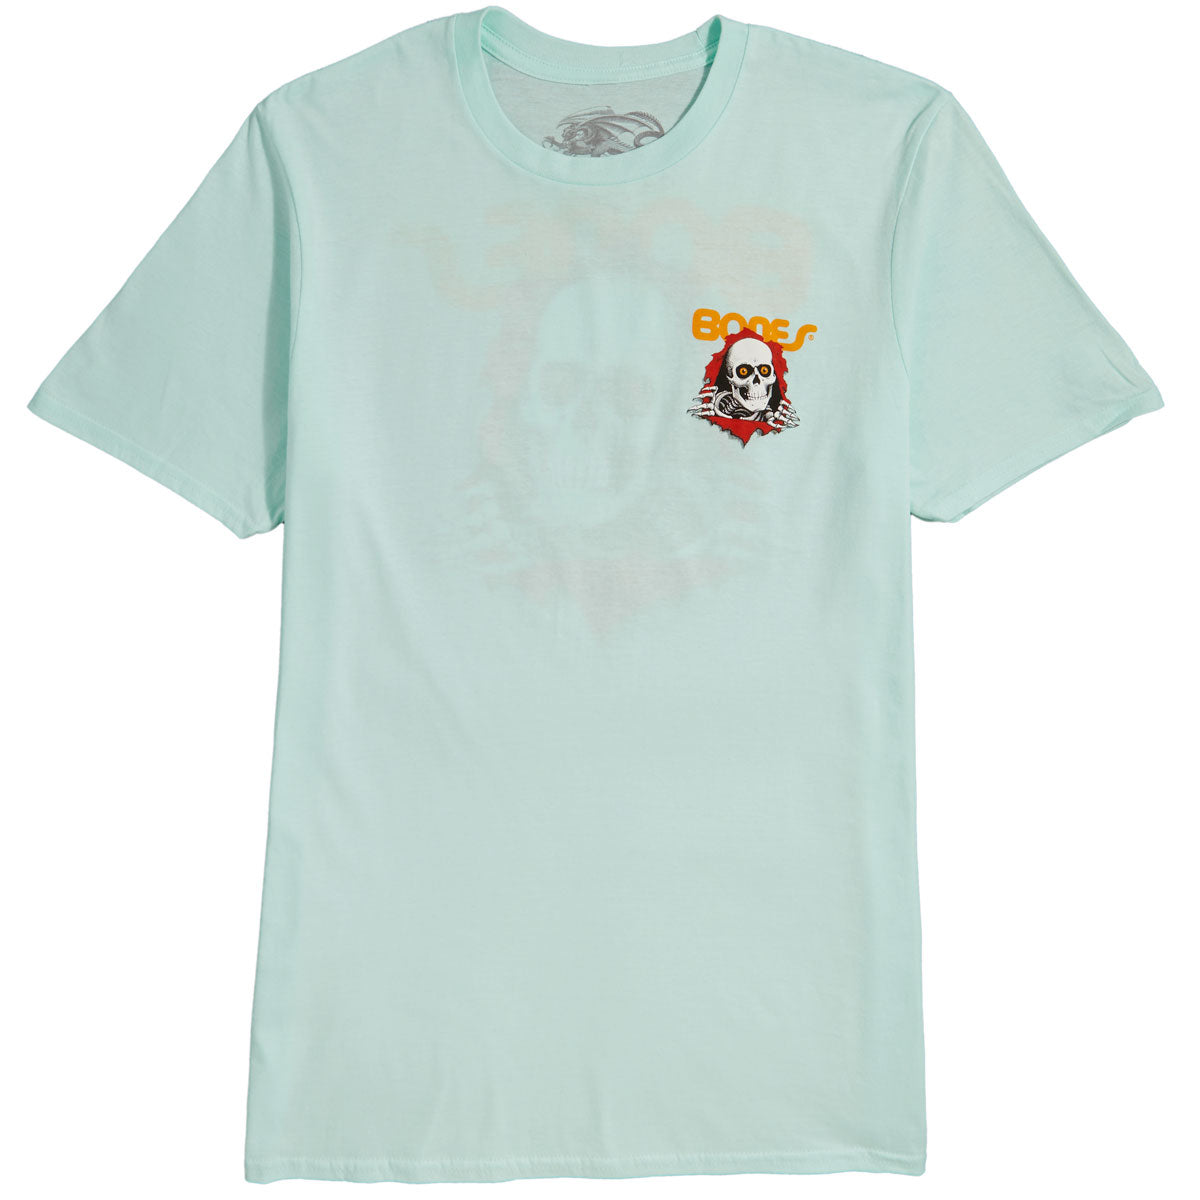 Powell-Peralta Ripper T-Shirt - Teal Ice image 2